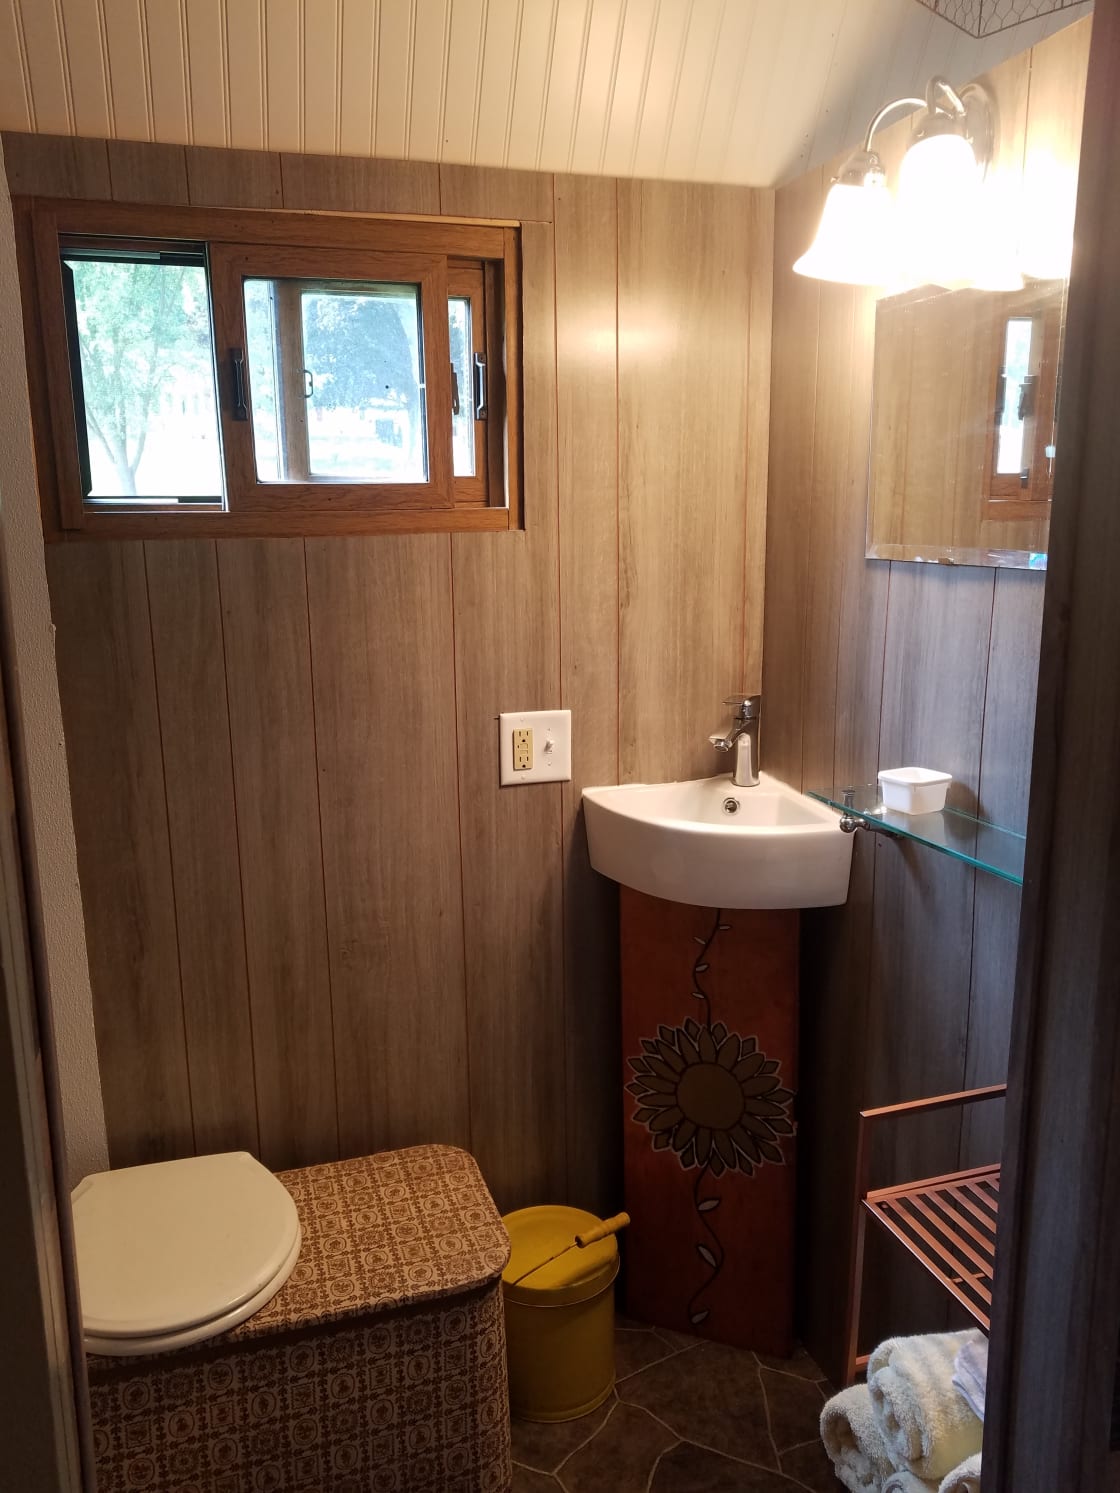 Bathroom with compostable toilet